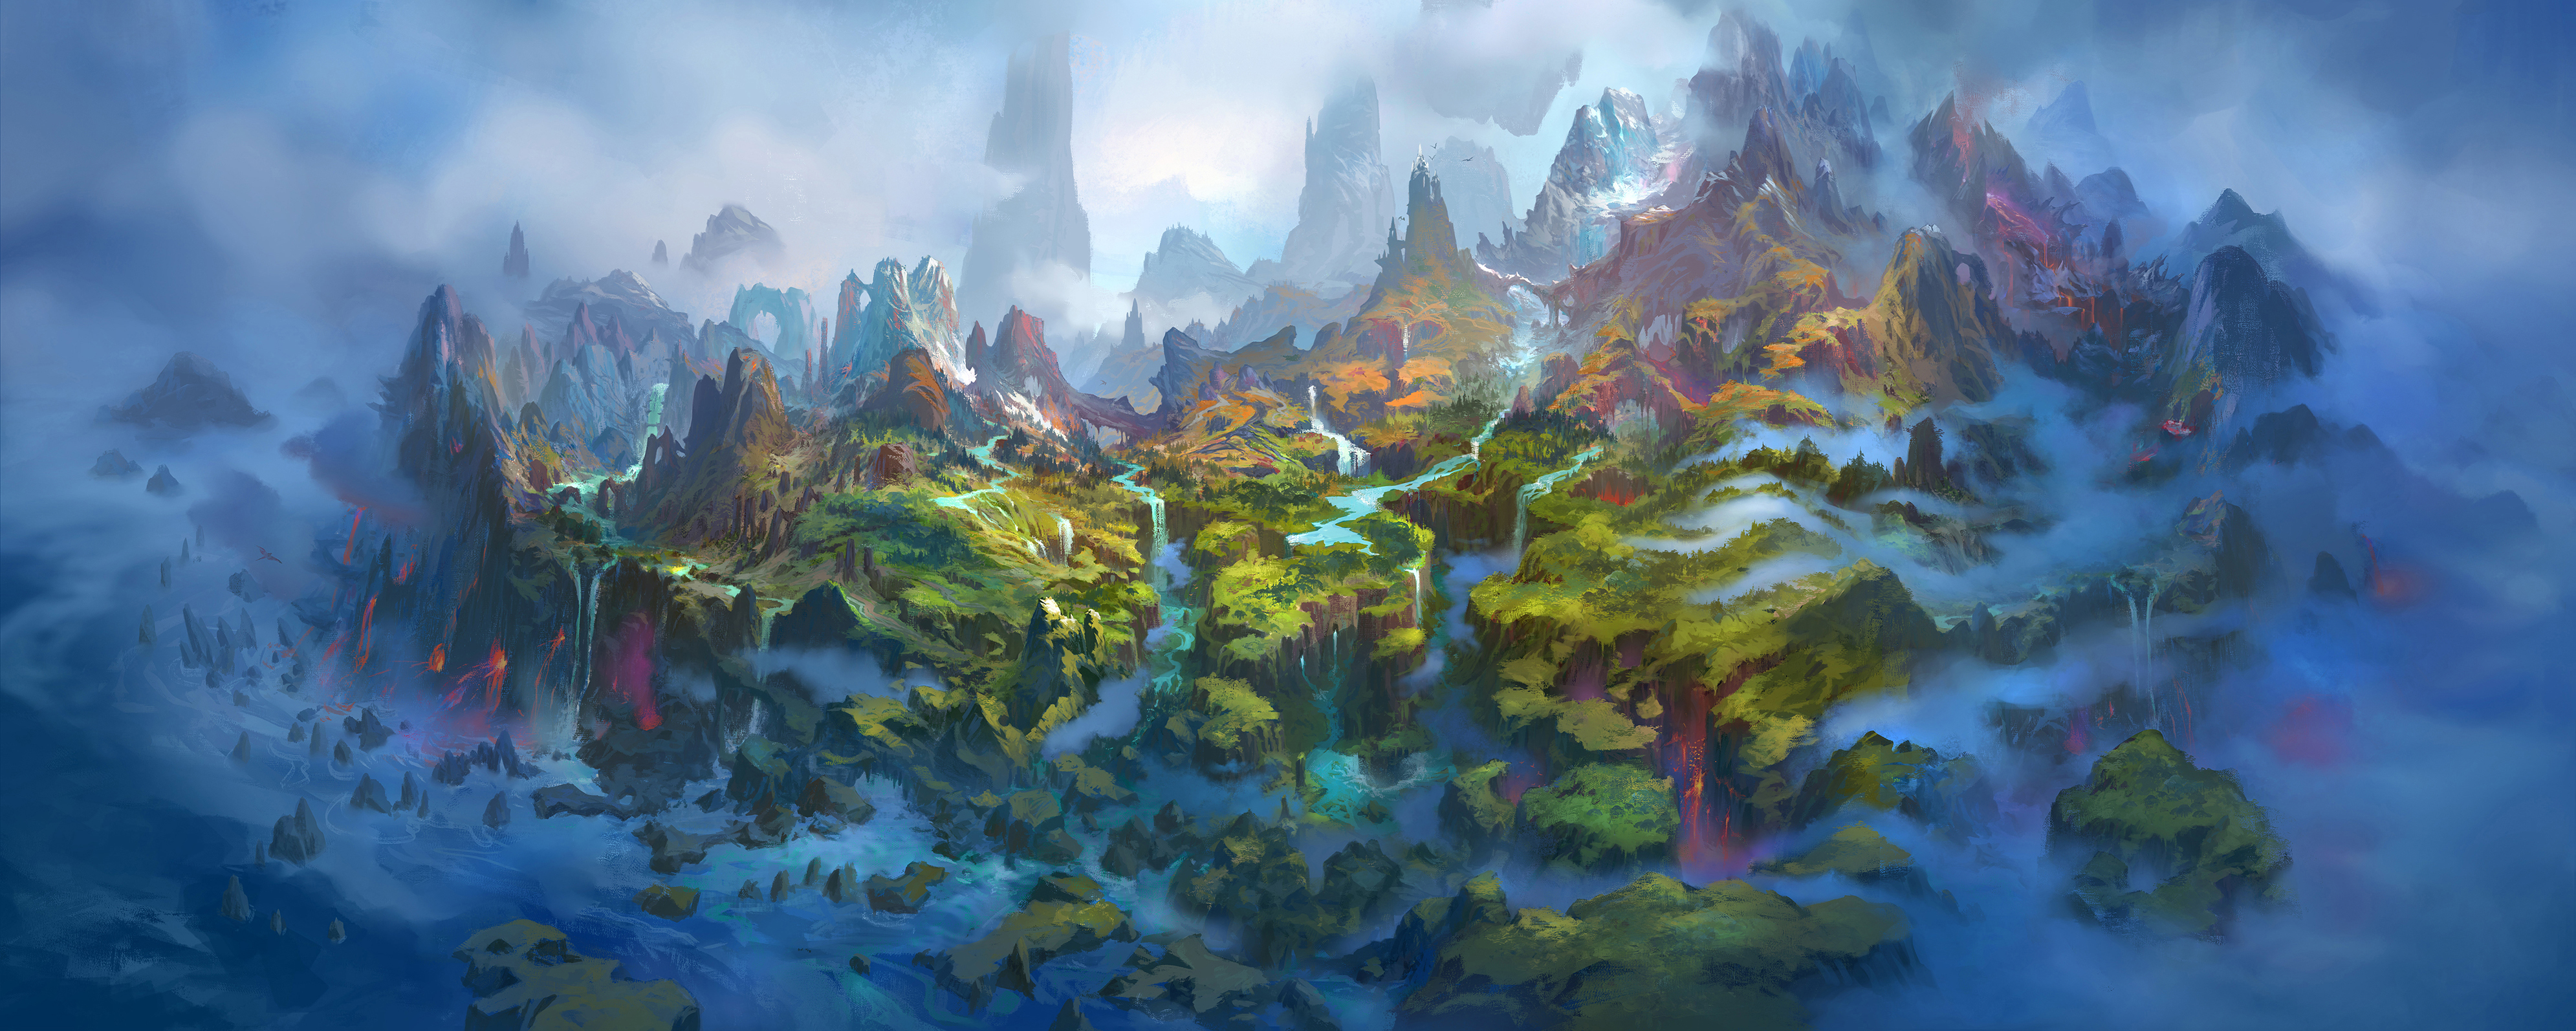 World of warcraft dragonflight hd papers and backgrounds